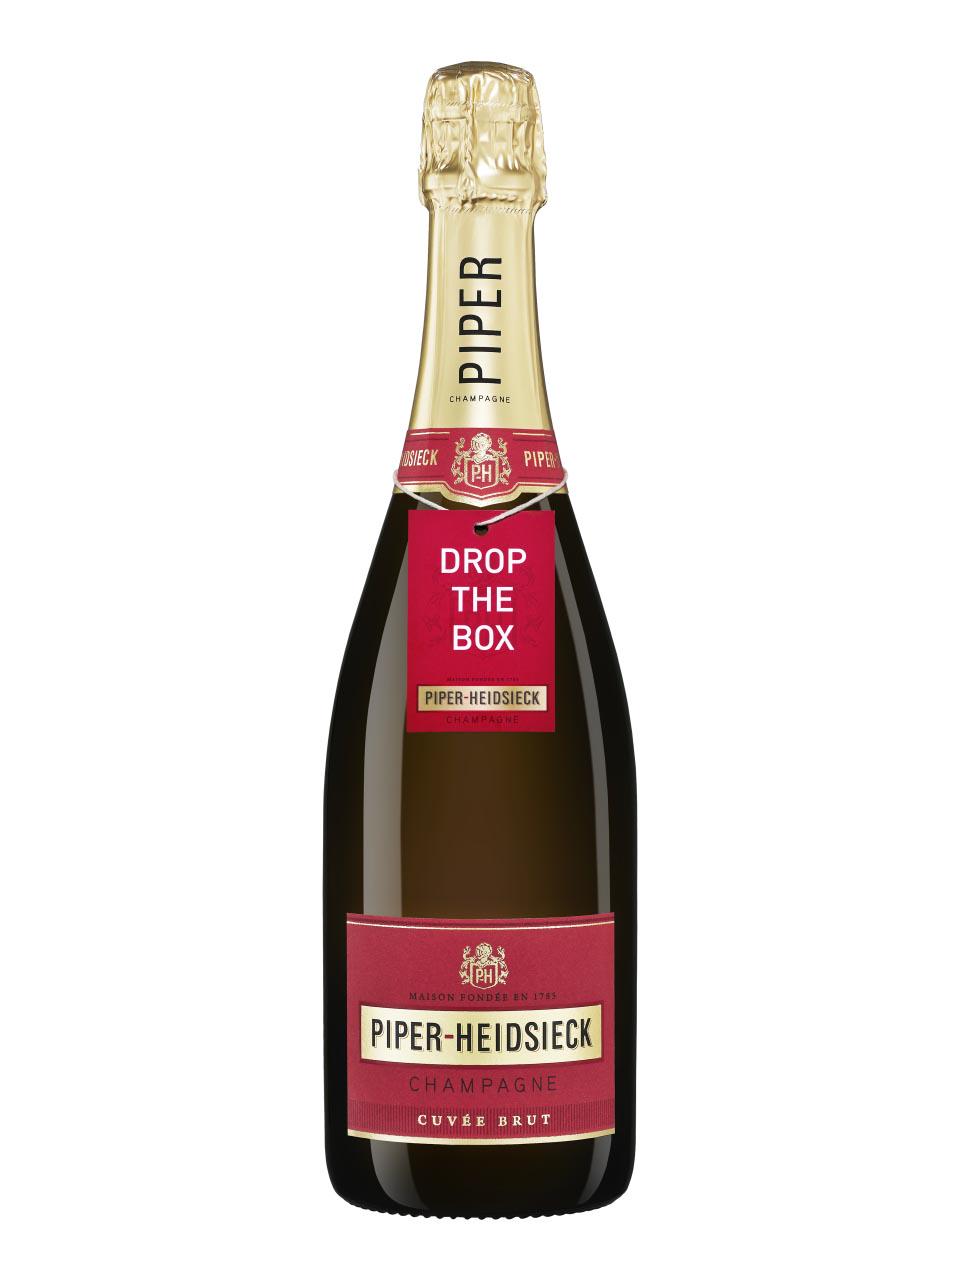 Piper-Heidsieck, Cuvée Brut, Champagne, AOC, brut, weiß (Chinese New Year  Limited Edition gift box) 0.75L | Frankfurt Airport Online Shopping